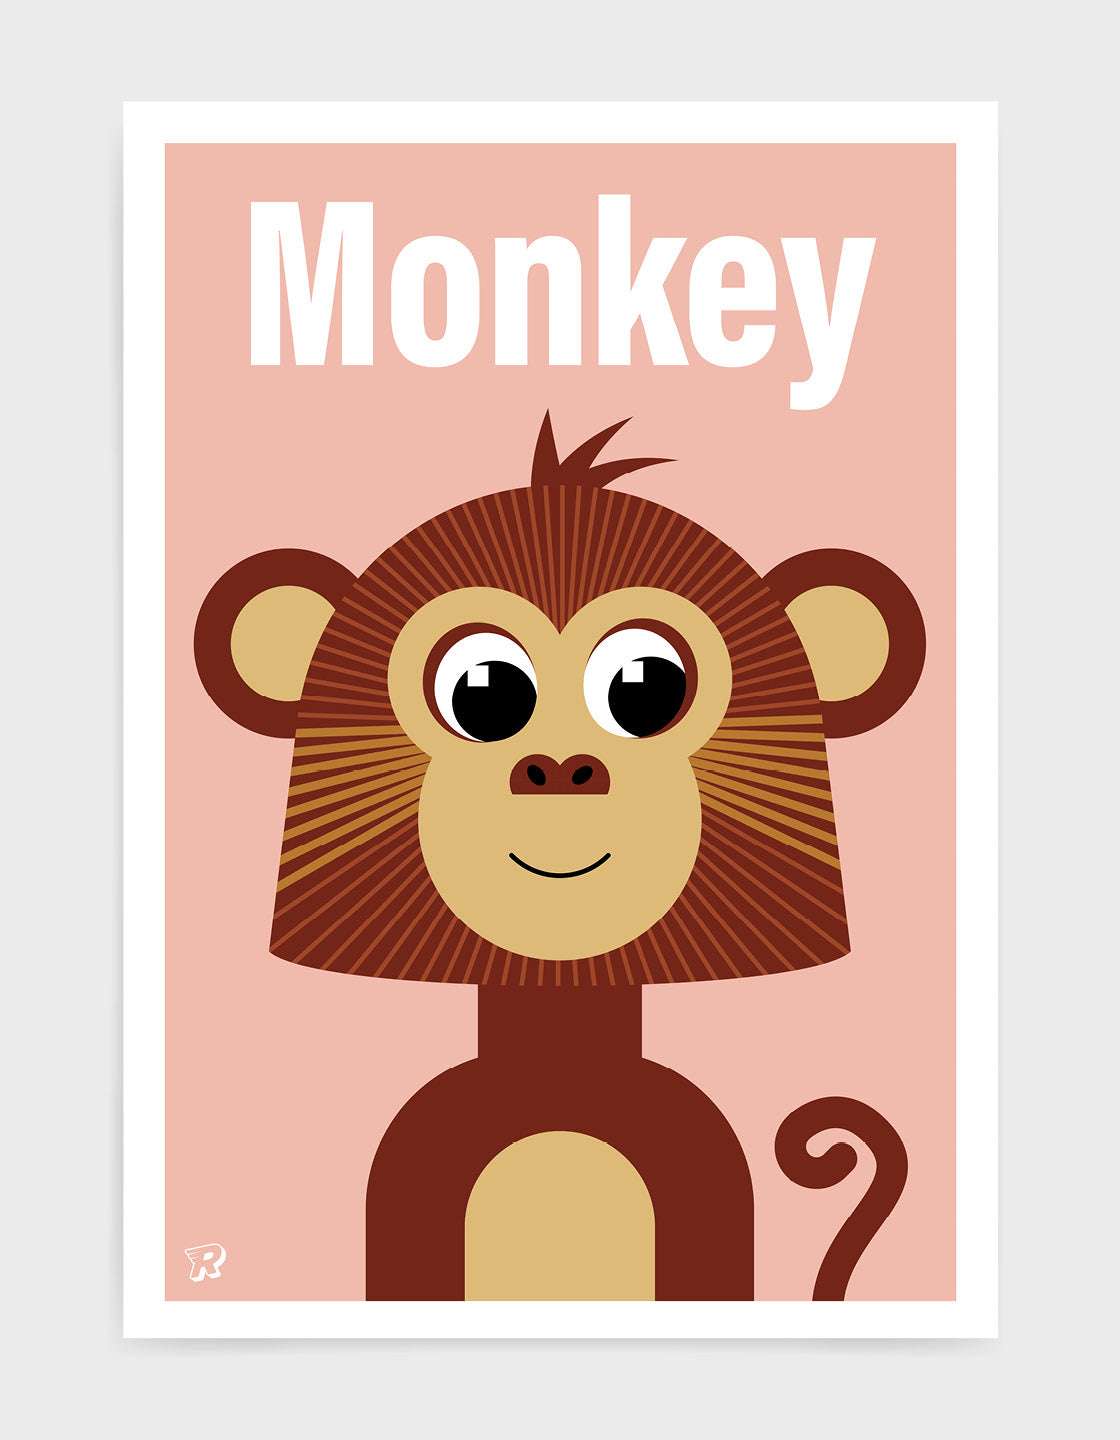 kids monkey illustrated art print with a brown cute monkey illustration on a pink backround. The word Monkey is at the top in a white font